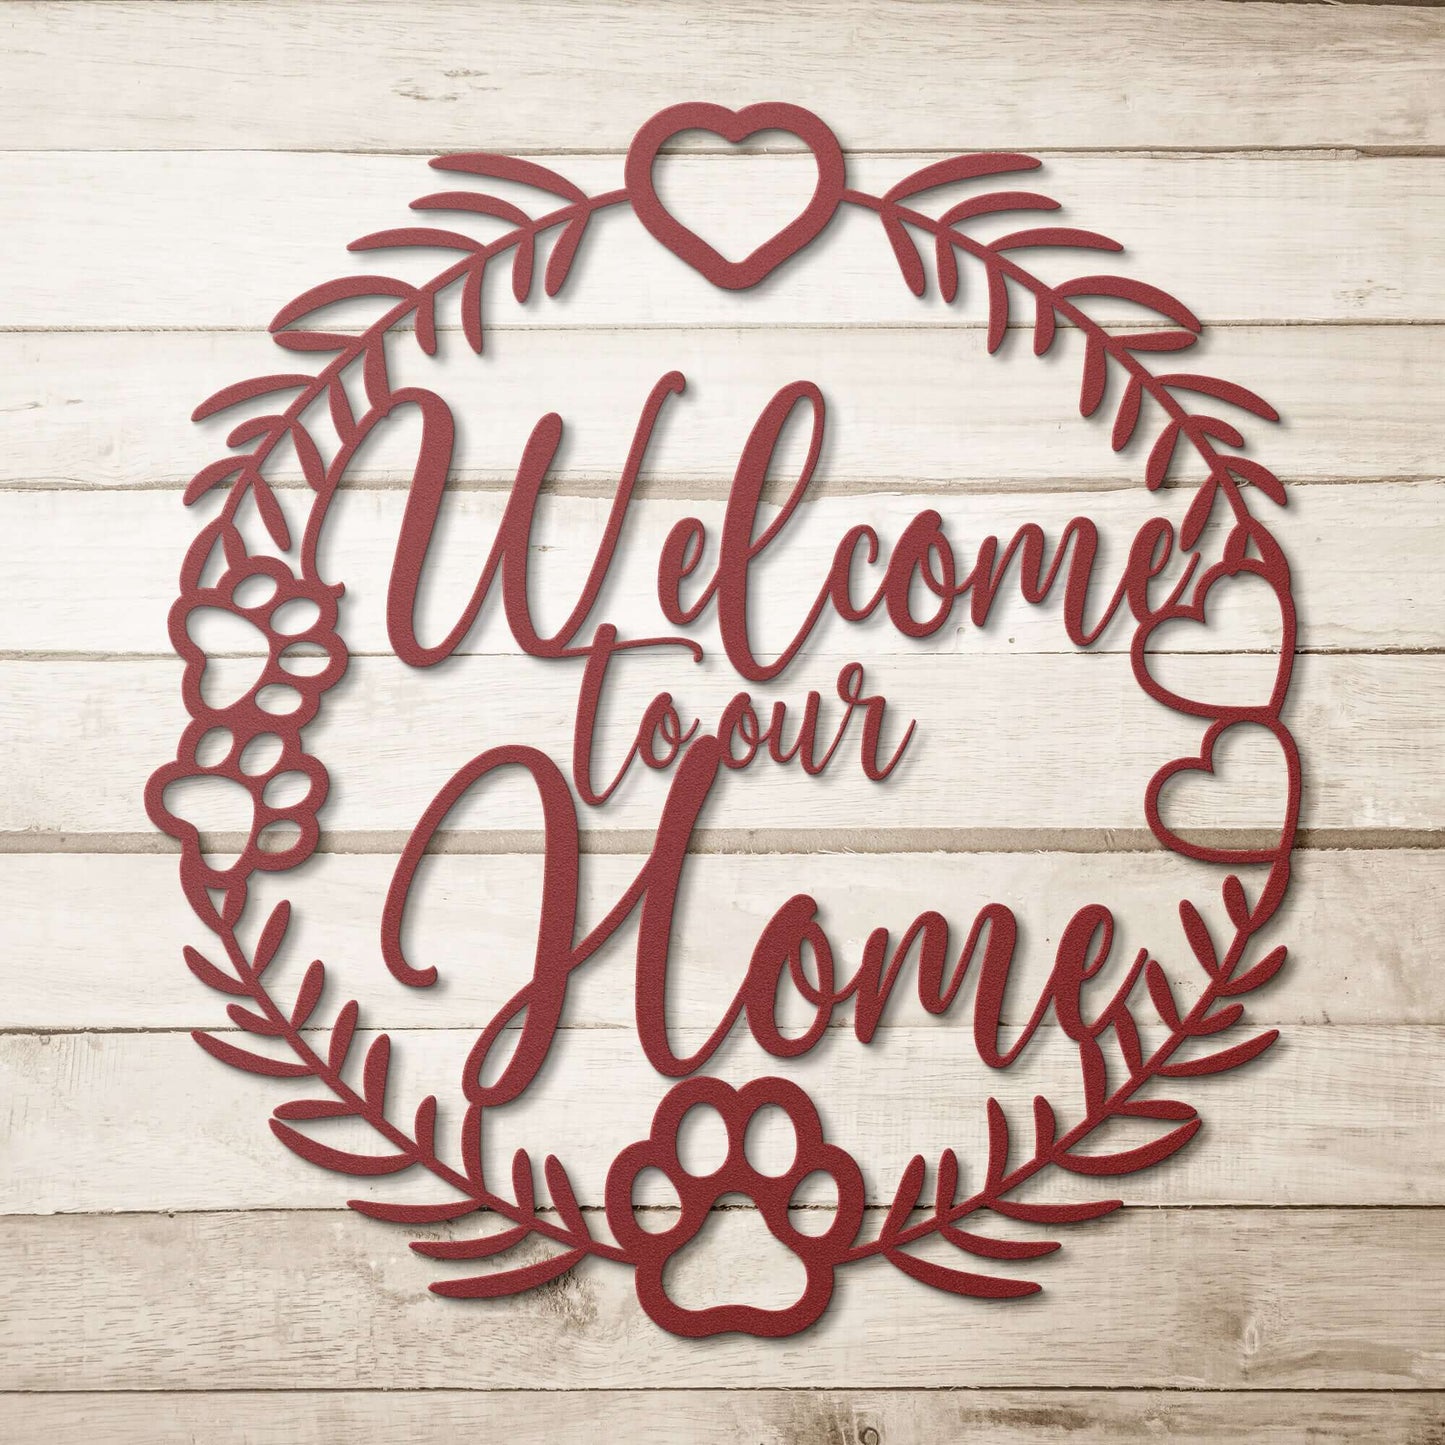 Welcome To Our Home, Outdoor Welcome Sign, Housewarming Gift, Metal Sign For Front Door Or Porch - Always Essential Gifts